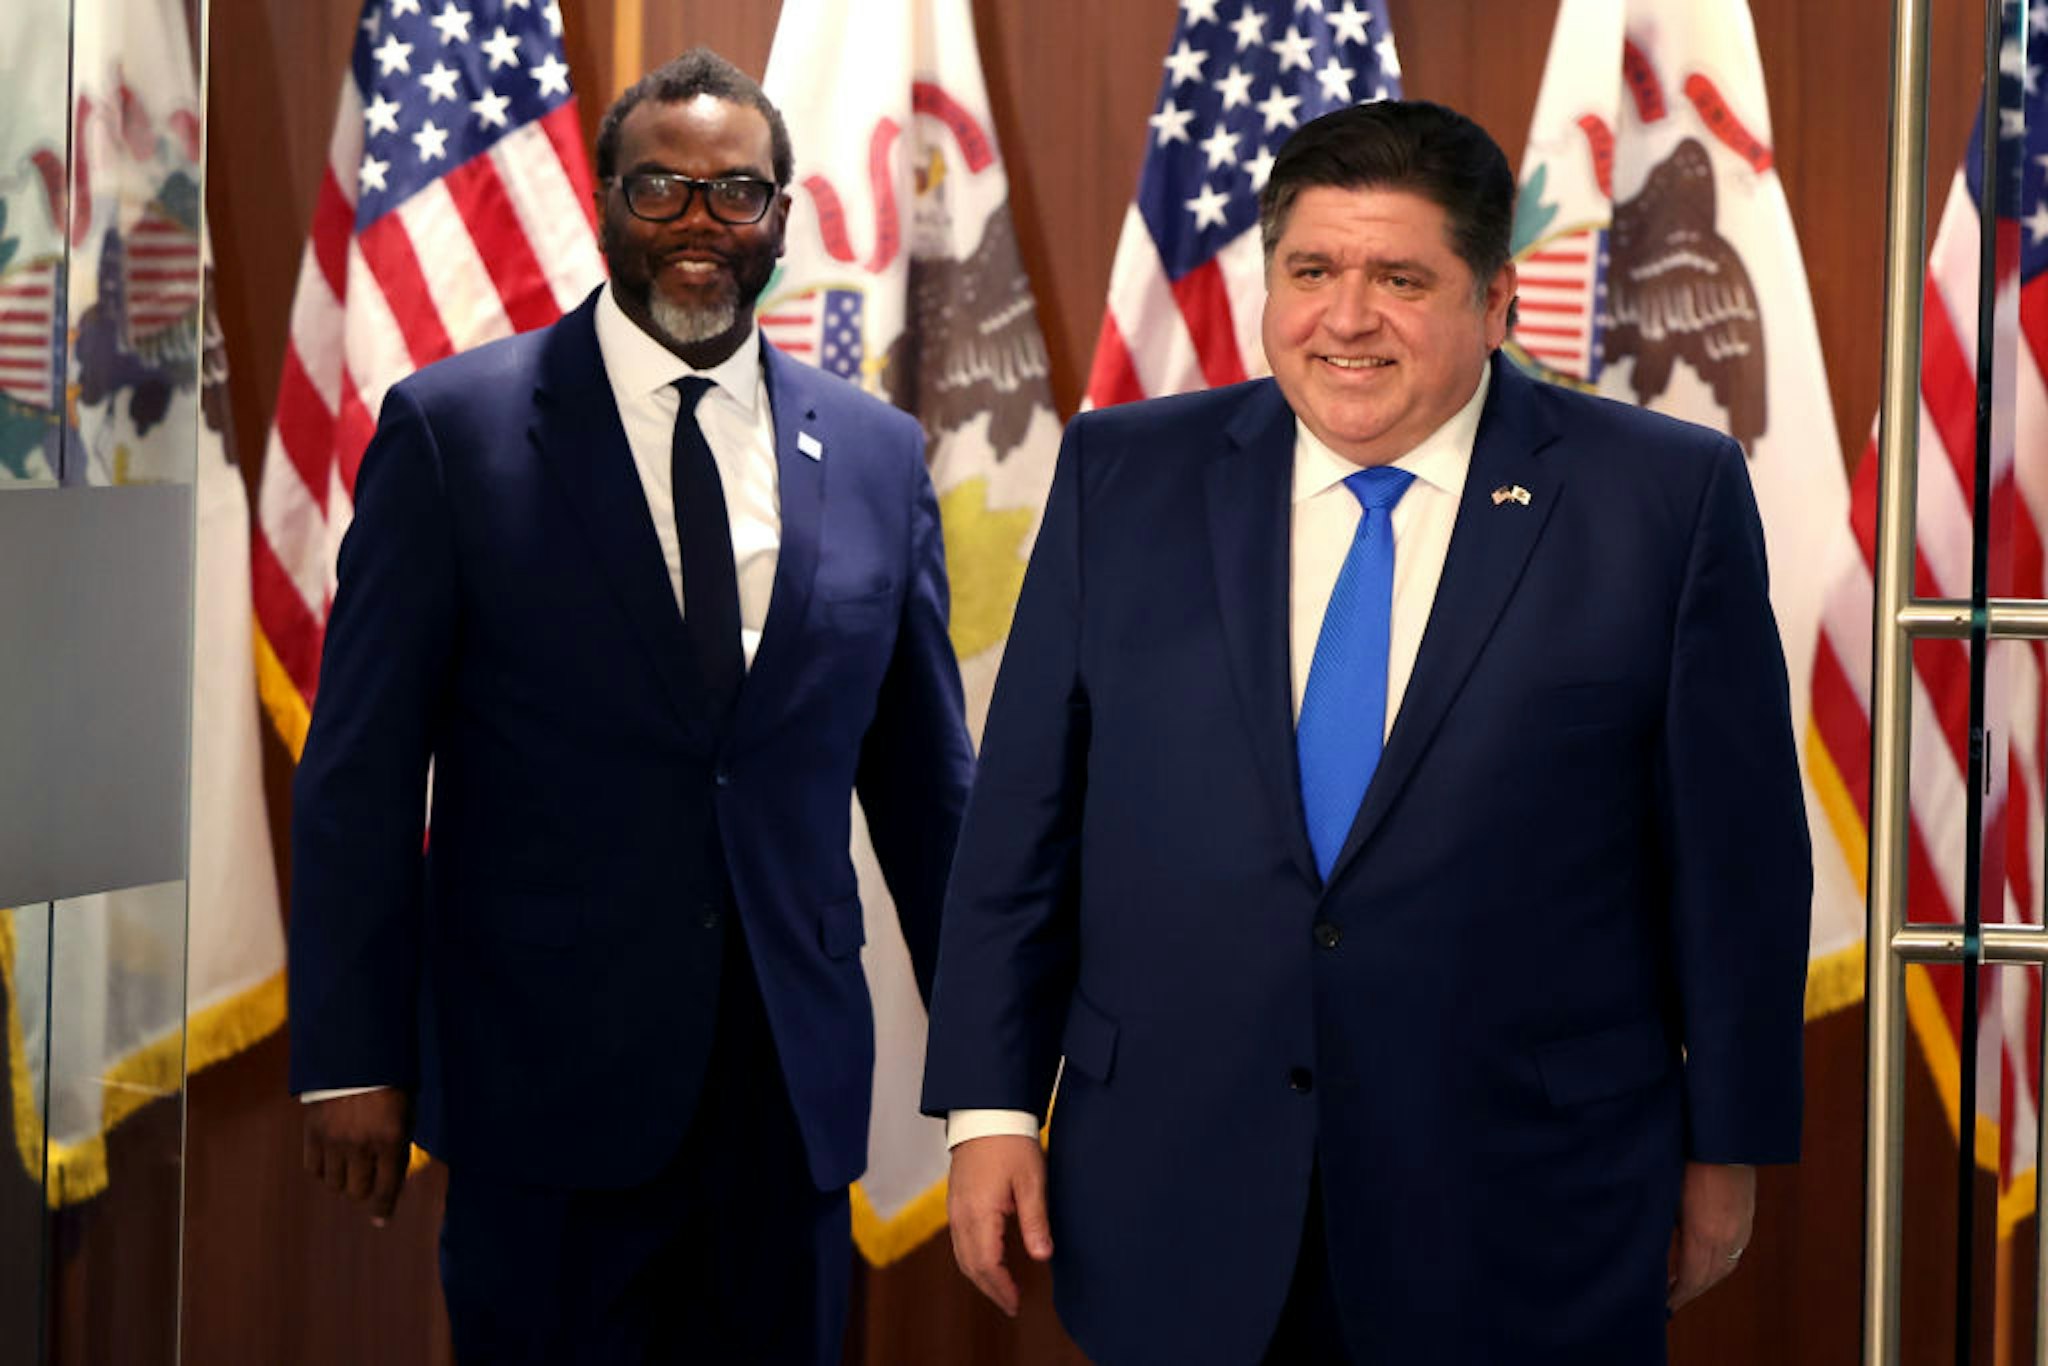 CHICAGO, ILLINOIS - APRIL 07: Chicago Mayor-Elect Brandon Johnson (L) and Illinois Governor J.B. Pritzker prepare to speak to the press after a meeting in the governor's office on April 07, 2023 in Chicago, Illinois. Johnson is scheduled to be sworn in as Chicago's 57th mayor on May 15.